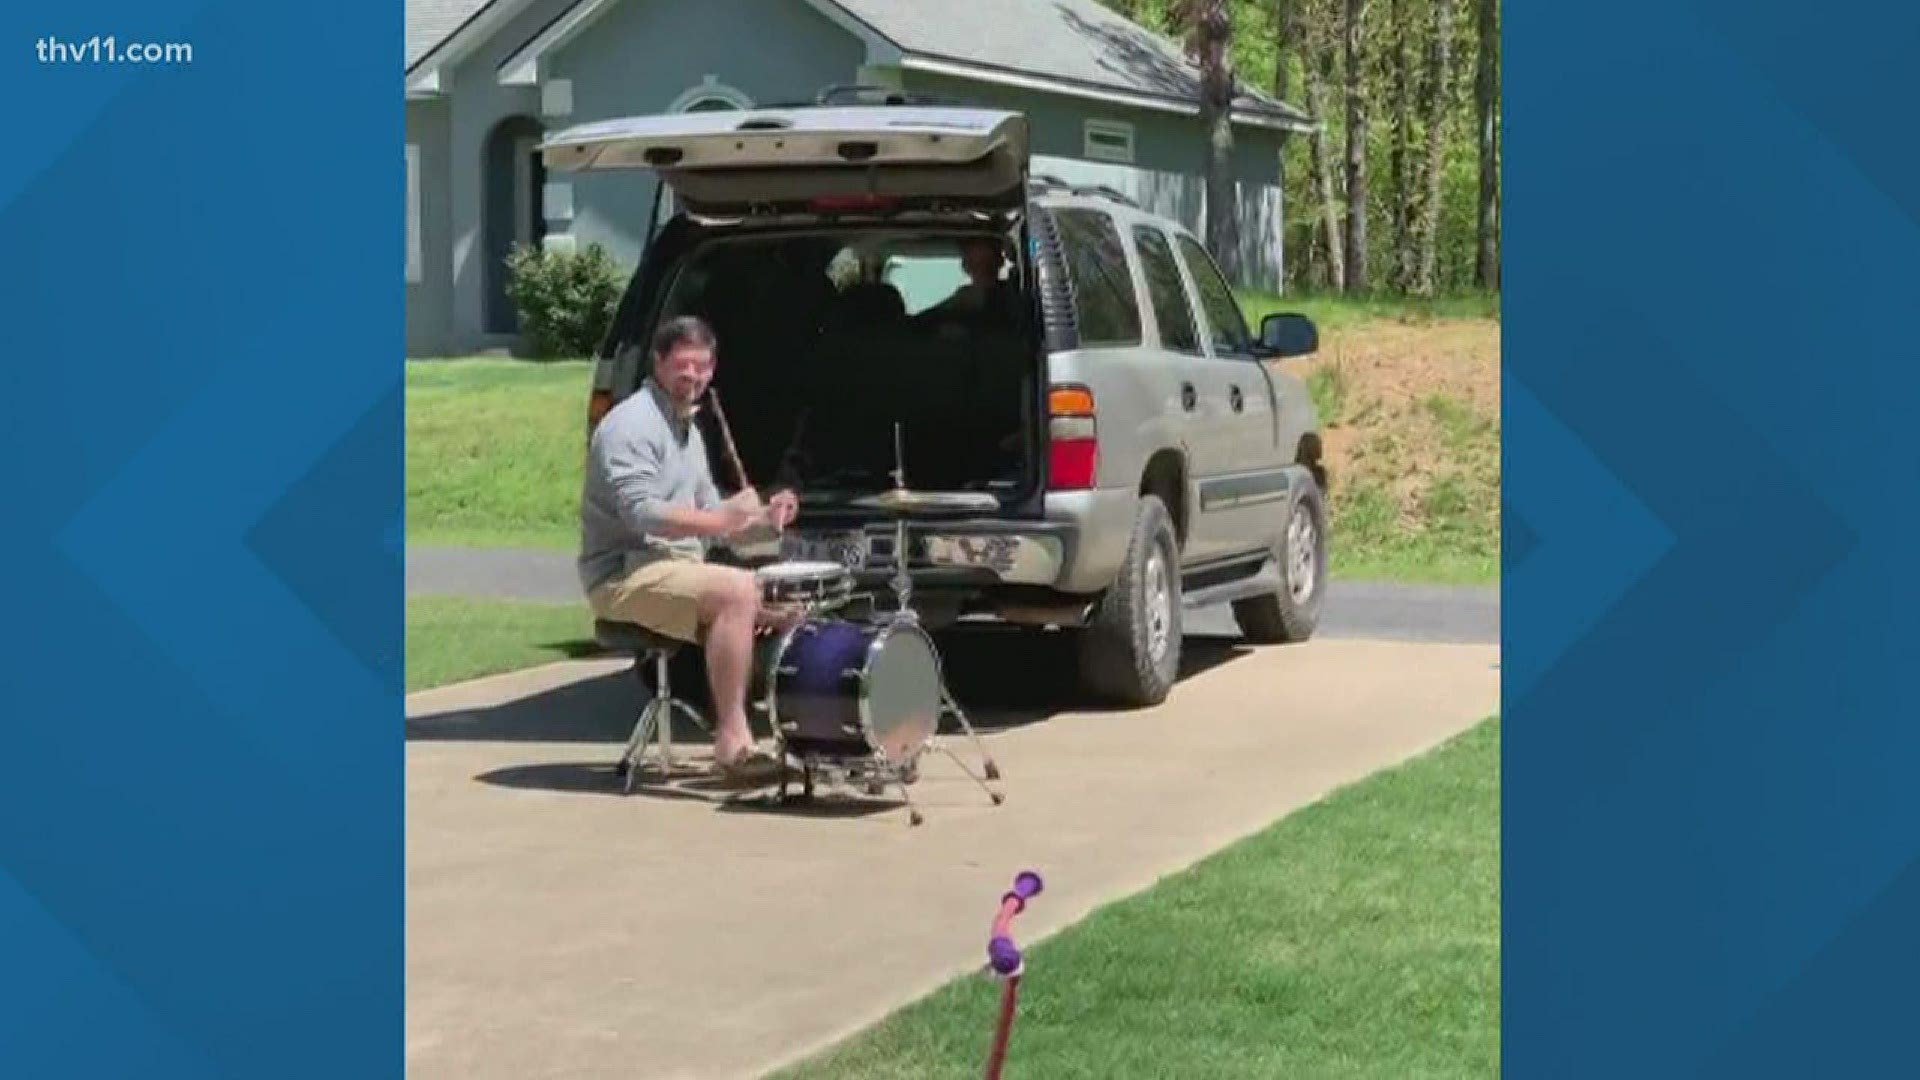 Mr. Moss brought the beats to 12-year-old Fisher Robinson's driveway.